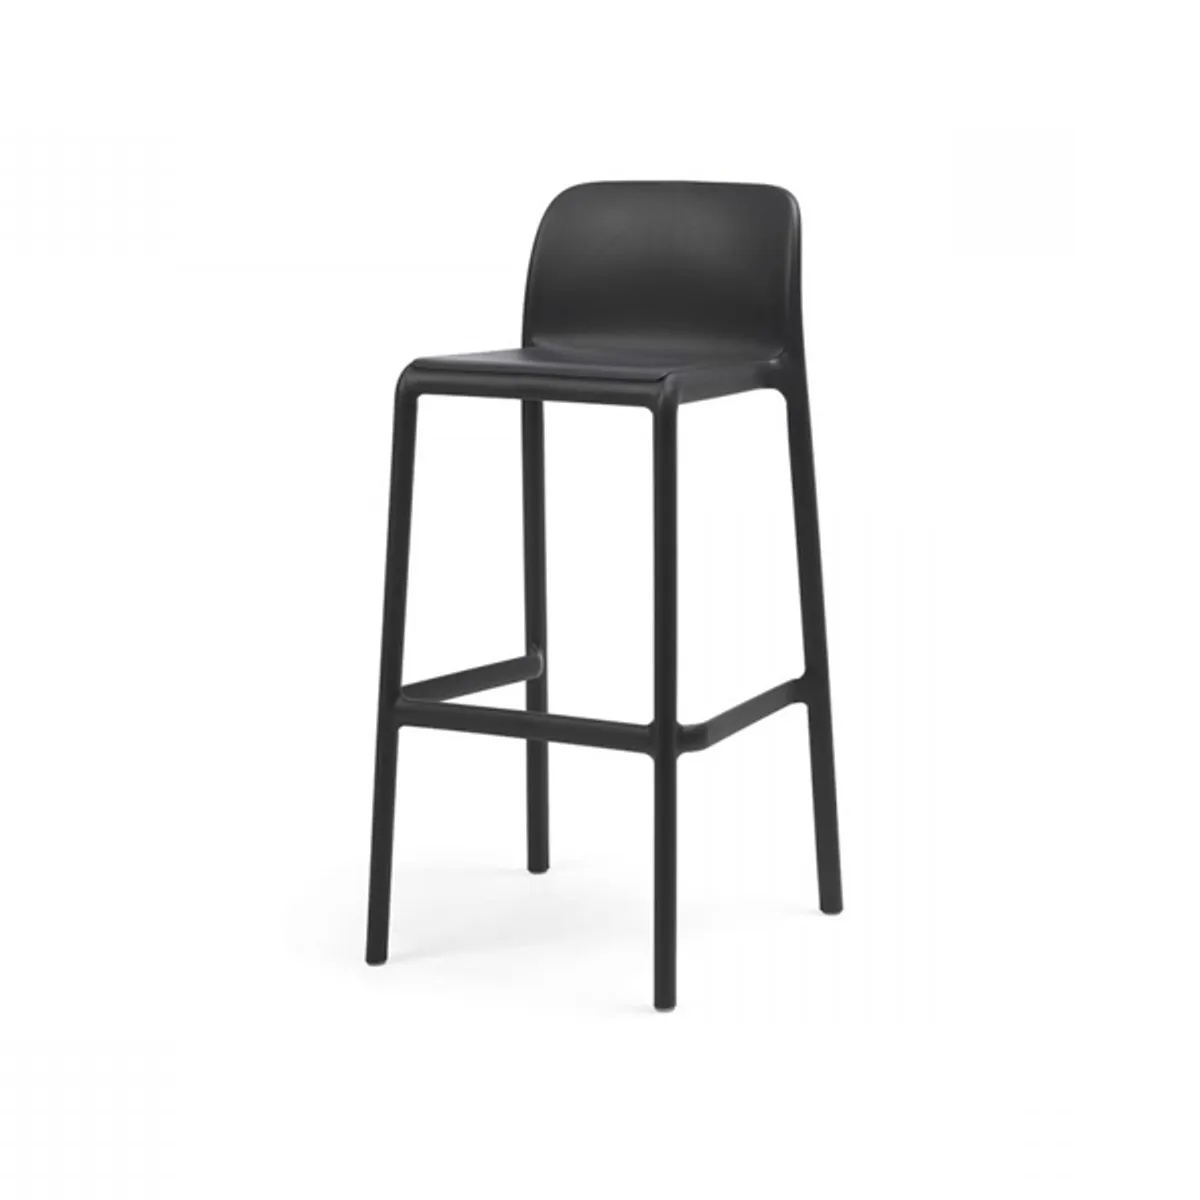 Faro bar stool Inside Out Contracts2